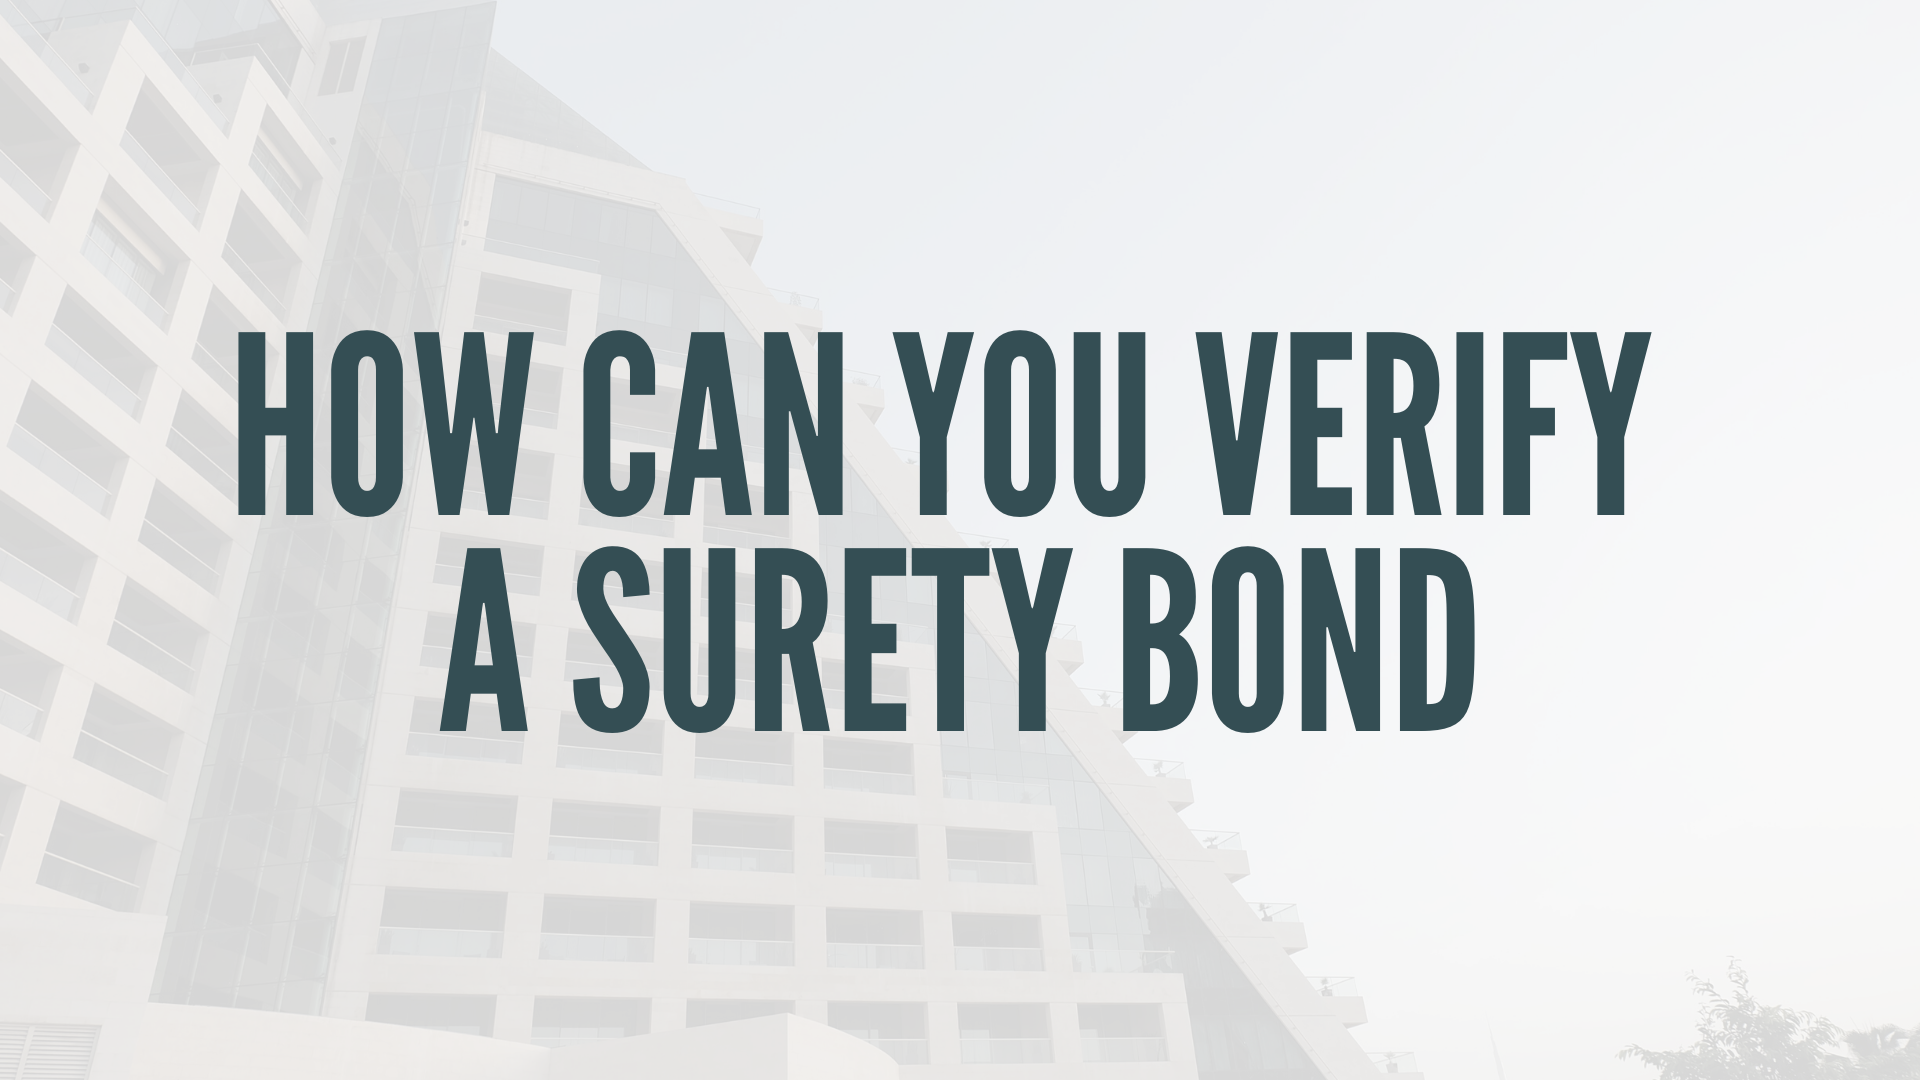 surety bond - How can a surety bond be verified - building in white hue